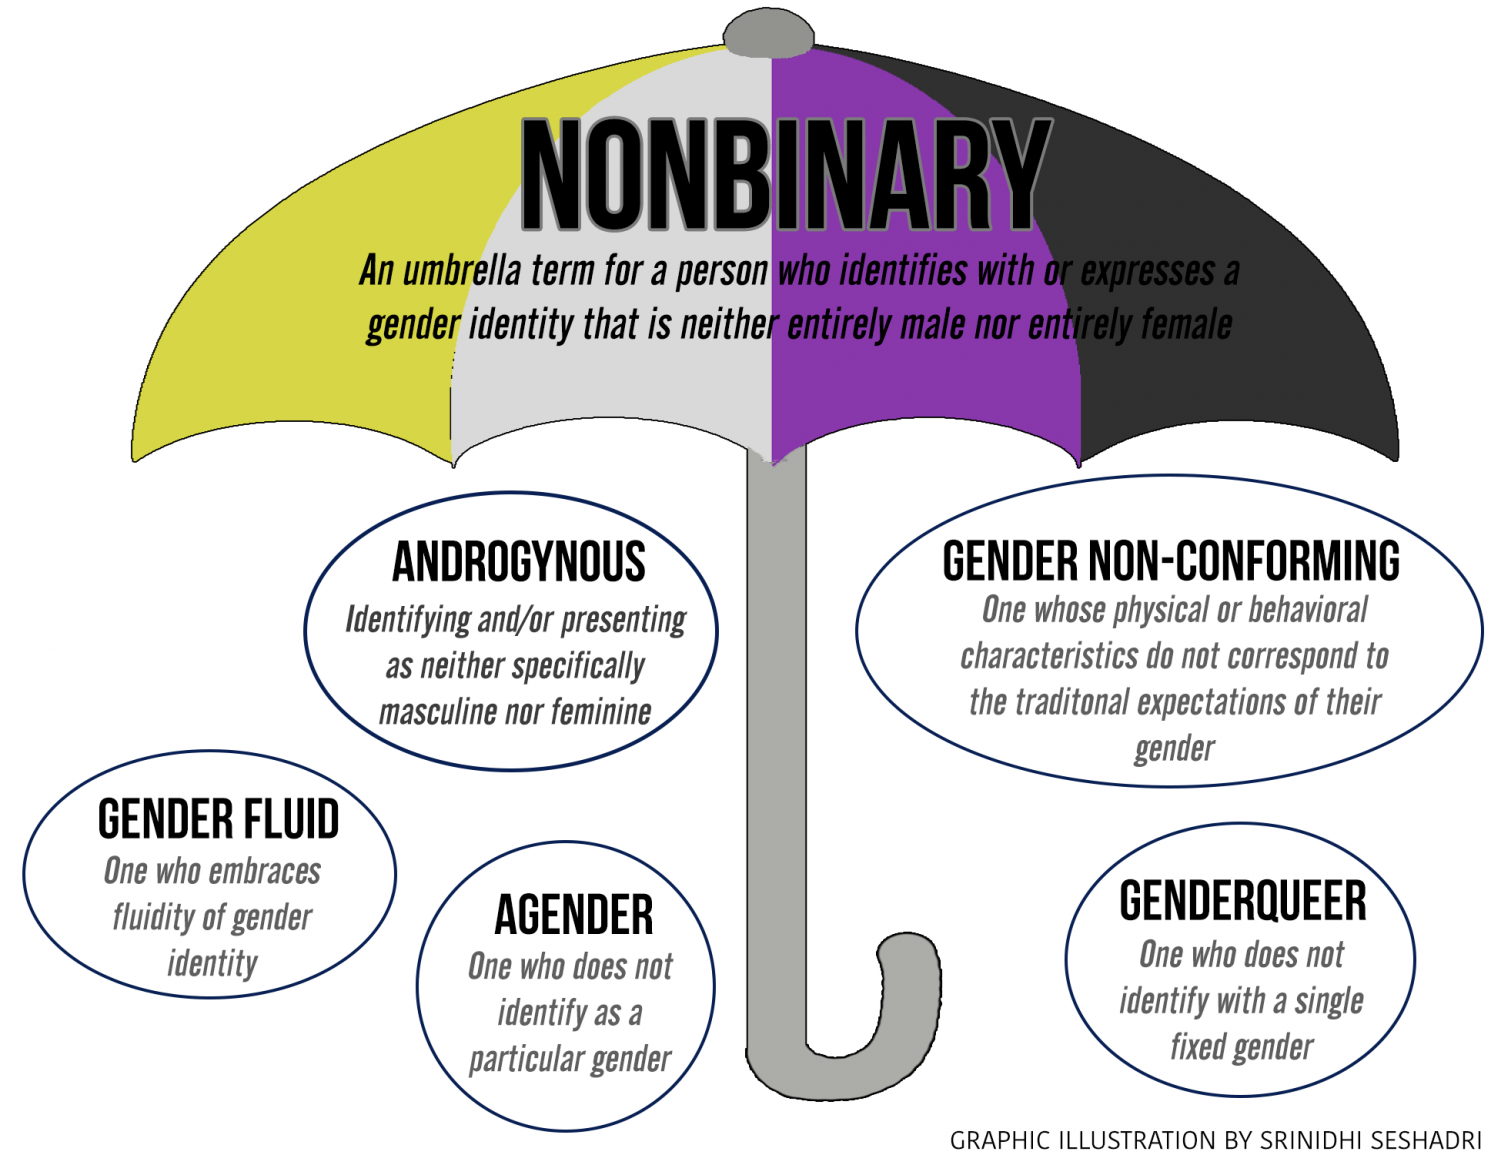 graphic for nonbinary awareness